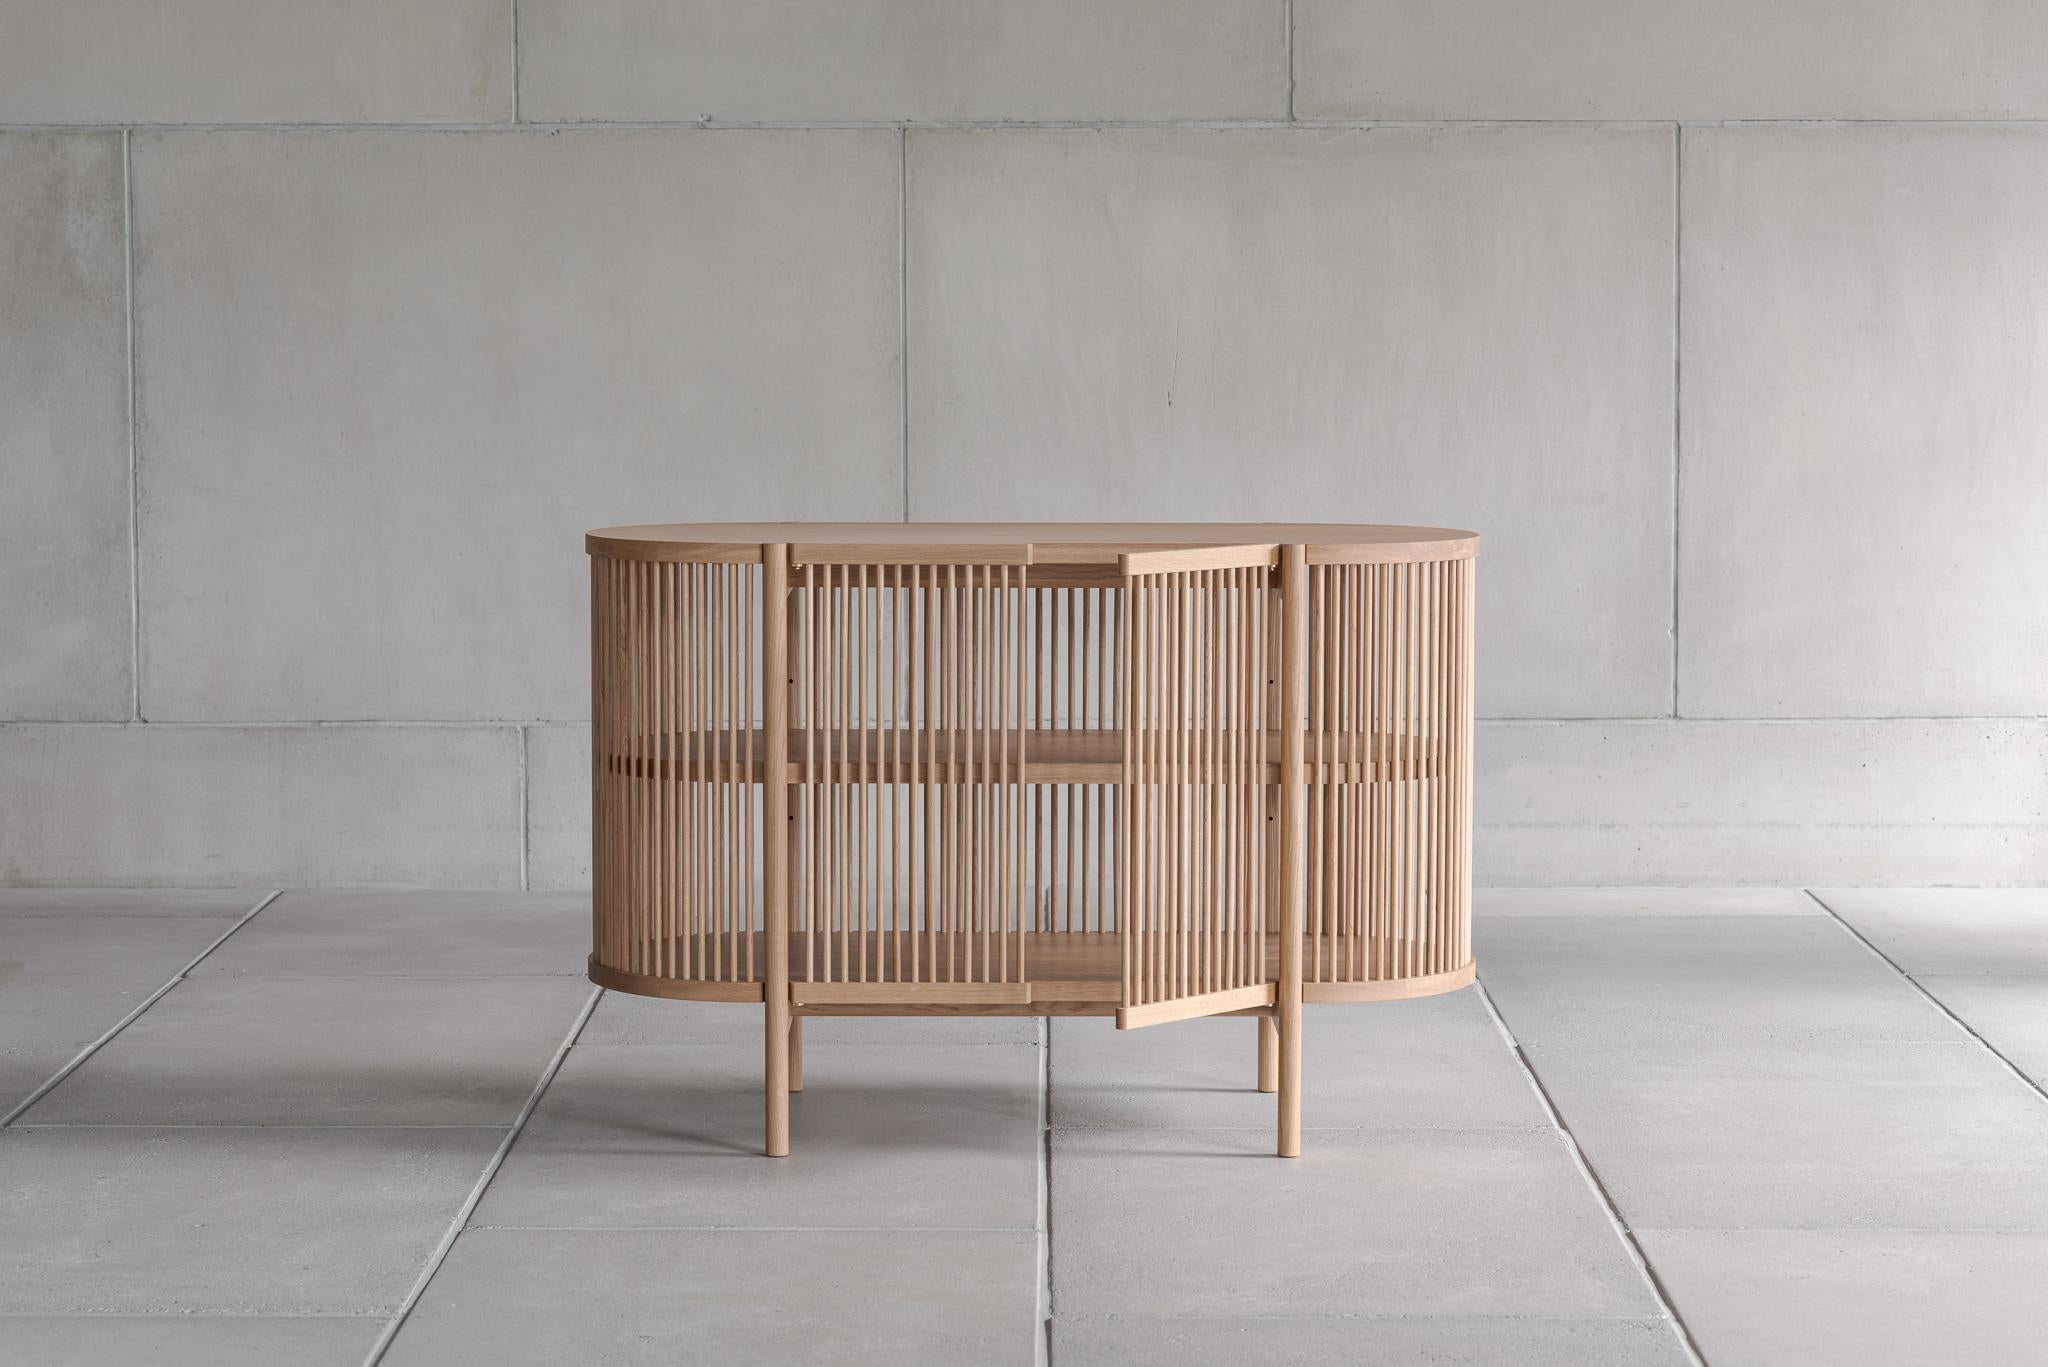 The Petit Bastone sideboard is a new addition to the Bastone case piece collection. It is designed by the master cabinet maker and designer Antrei Hartikainen for Poiat.

Somewhere on the boundary of art and design, the collection showcases the